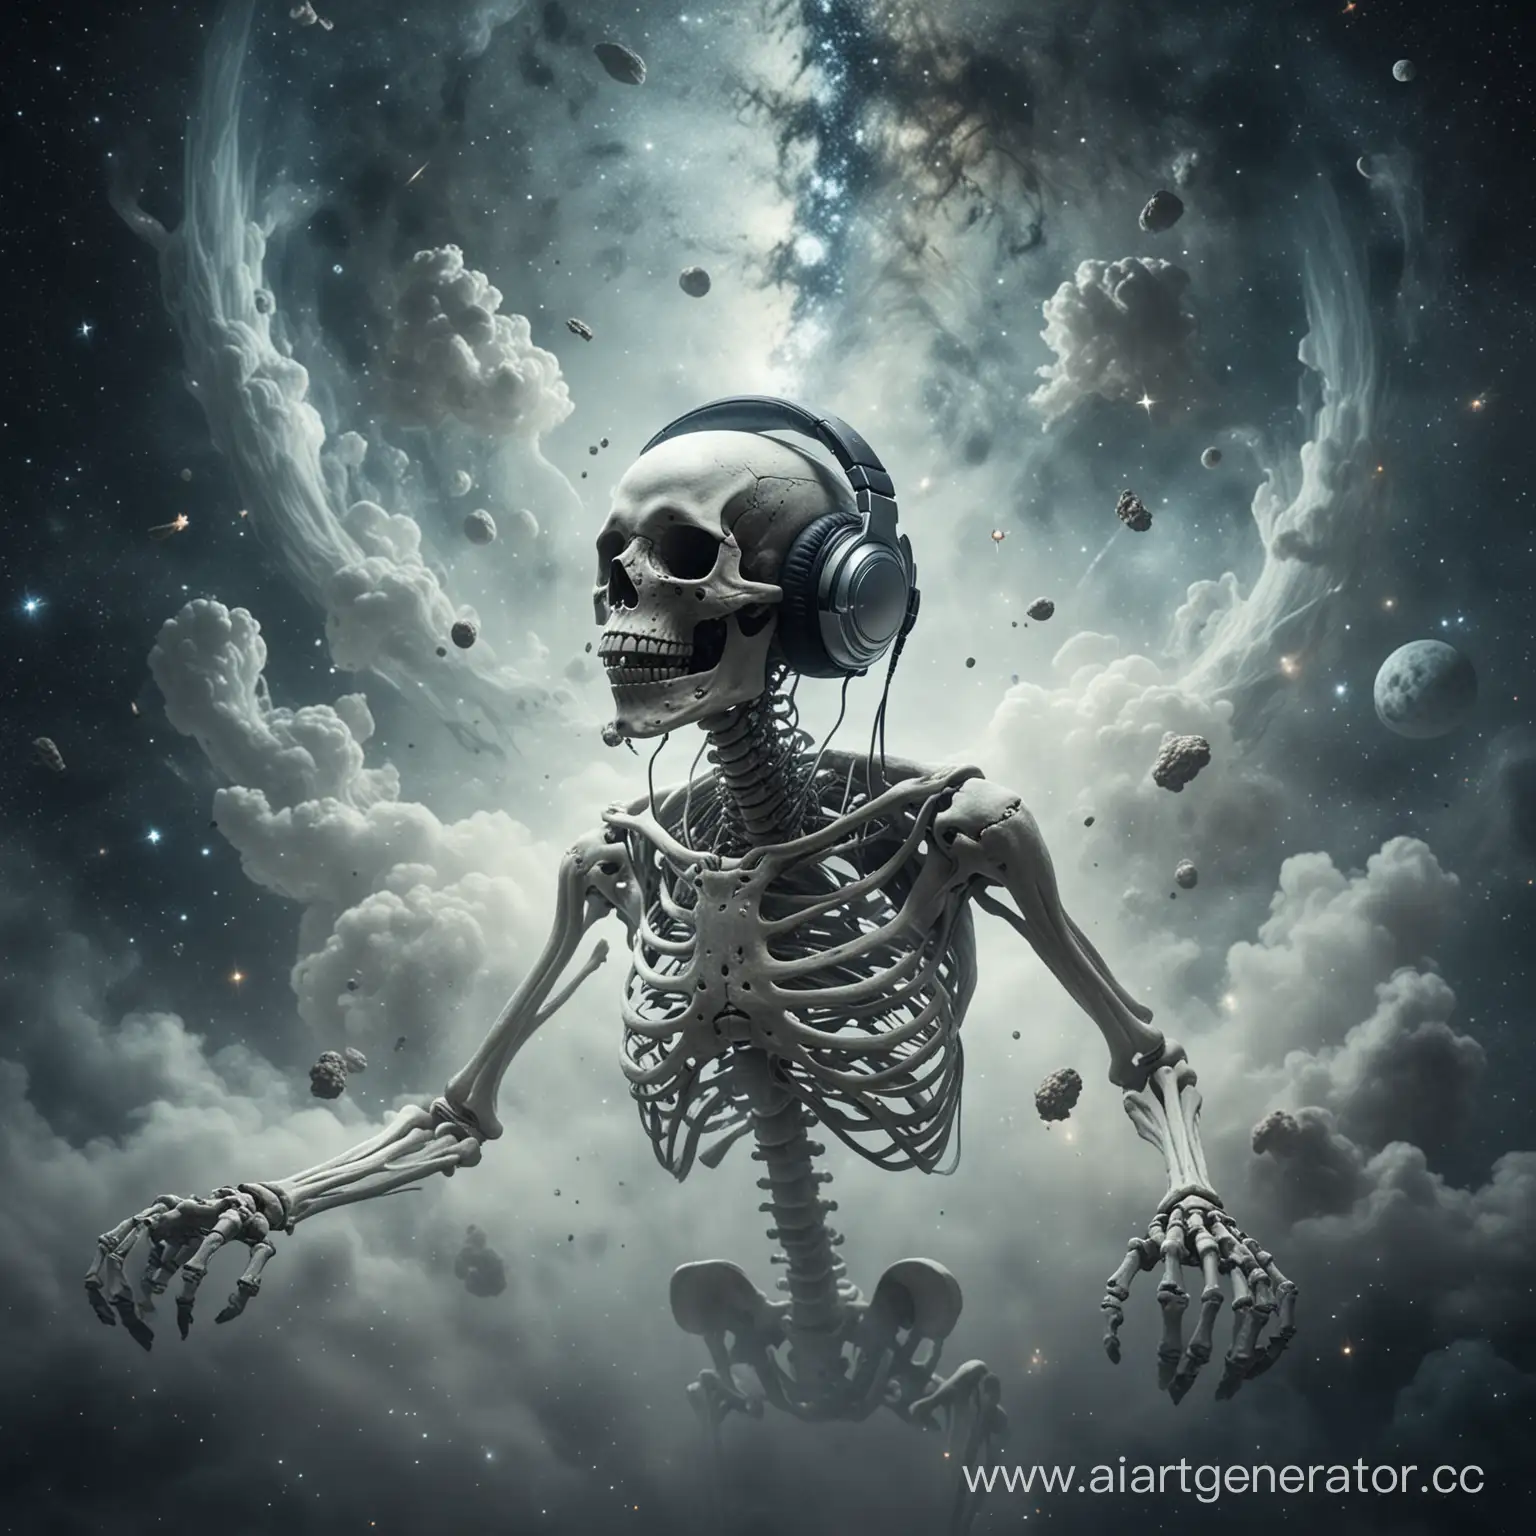 Dreamy-Skeleton-Listening-to-Music-in-Space-amidst-Fog